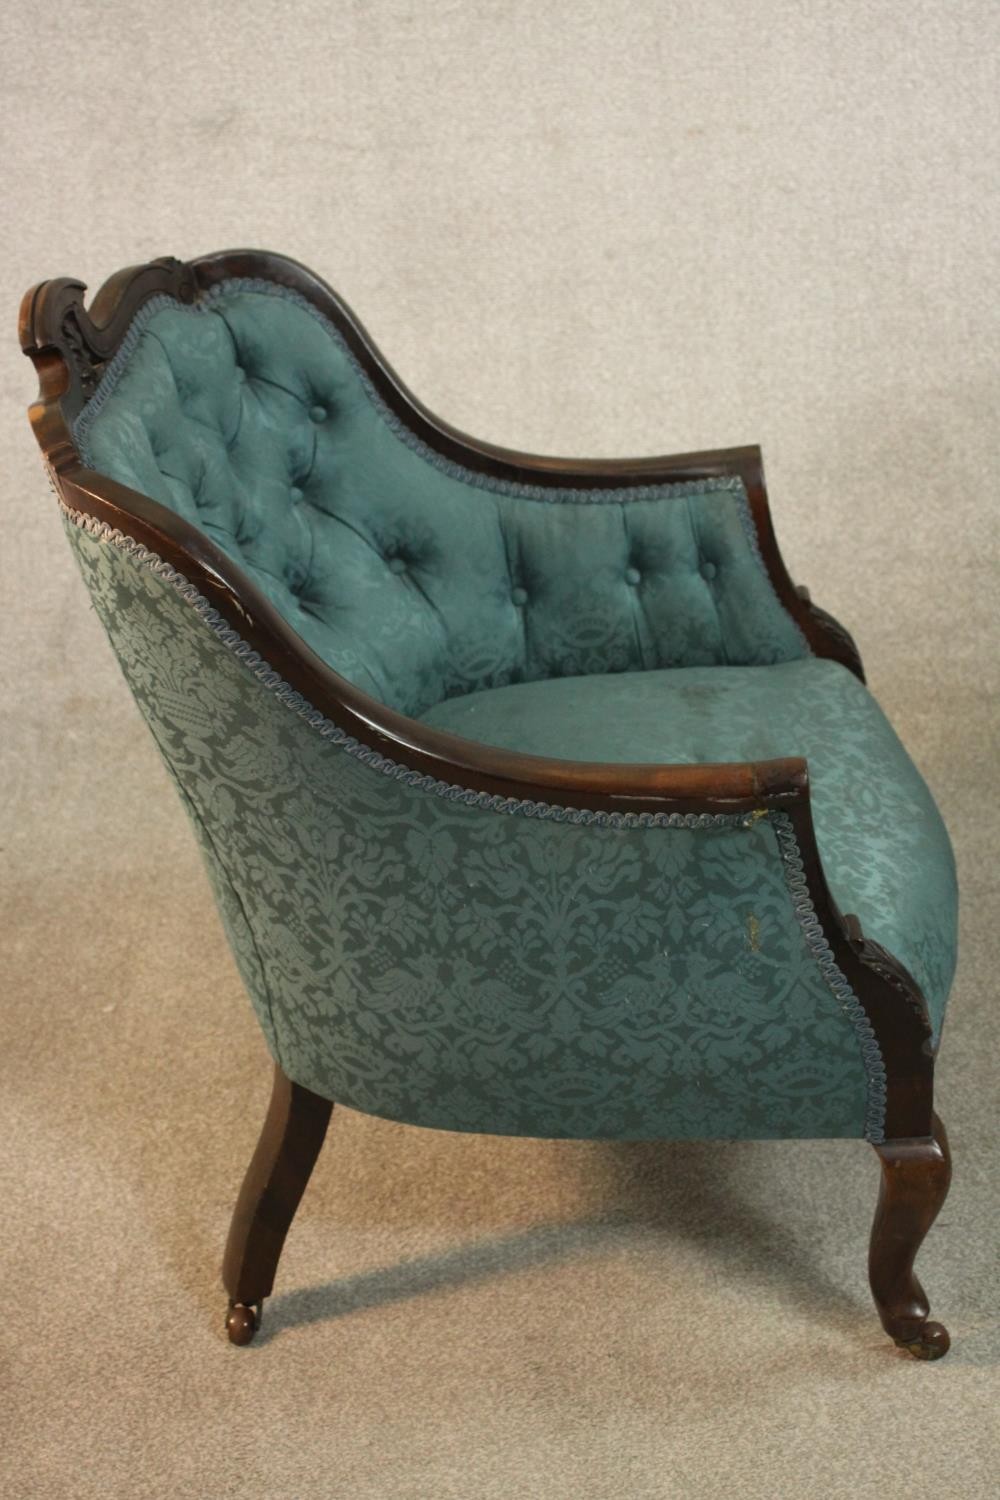 A pair of Edwardian walnut tub armchairs, upholstered in buttoned blue damask, with scrolling arms - Image 6 of 10